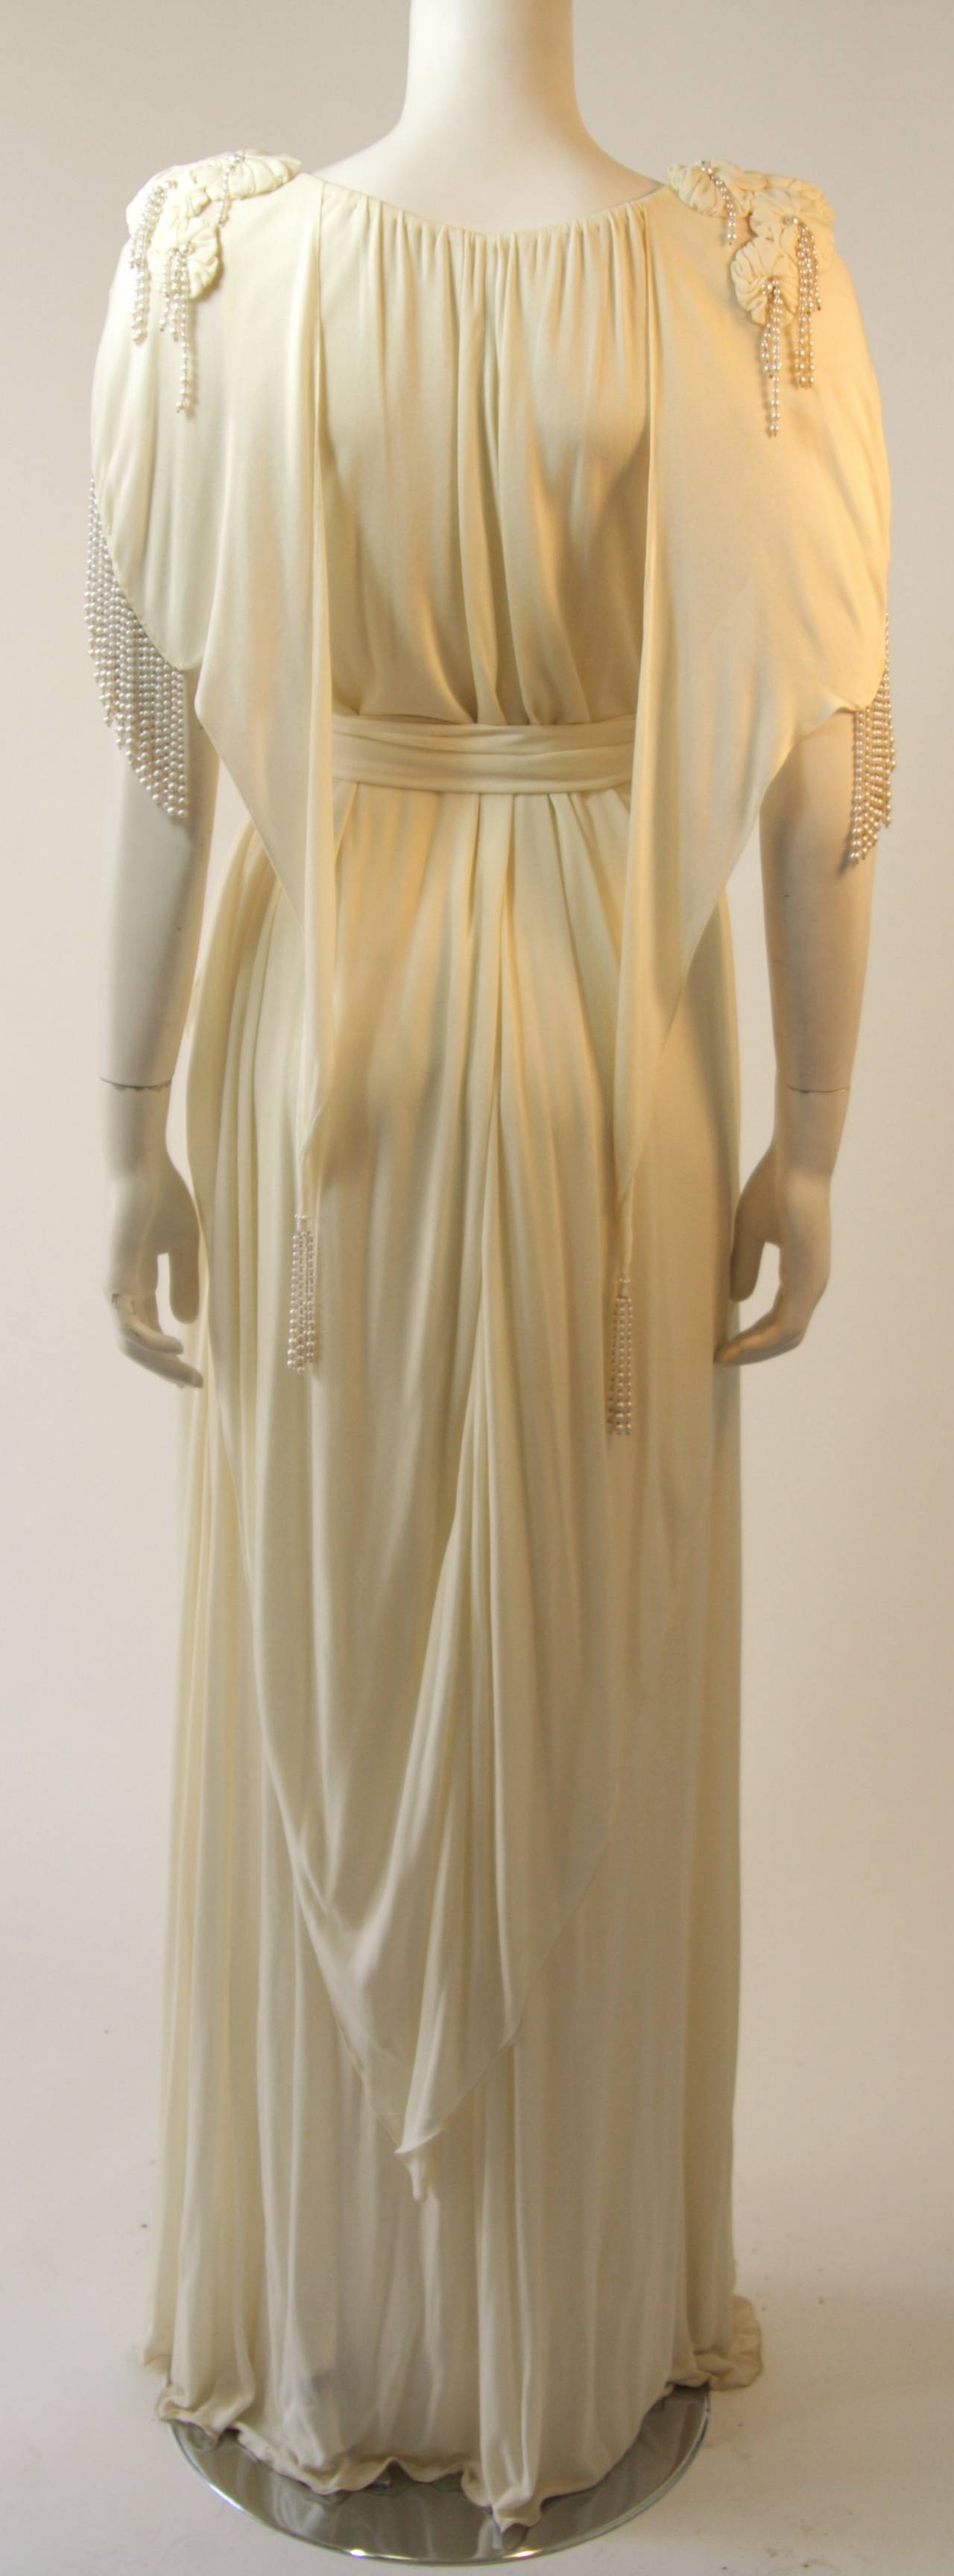 Holly's Harp Off White Jersey Gown with Pearls 4